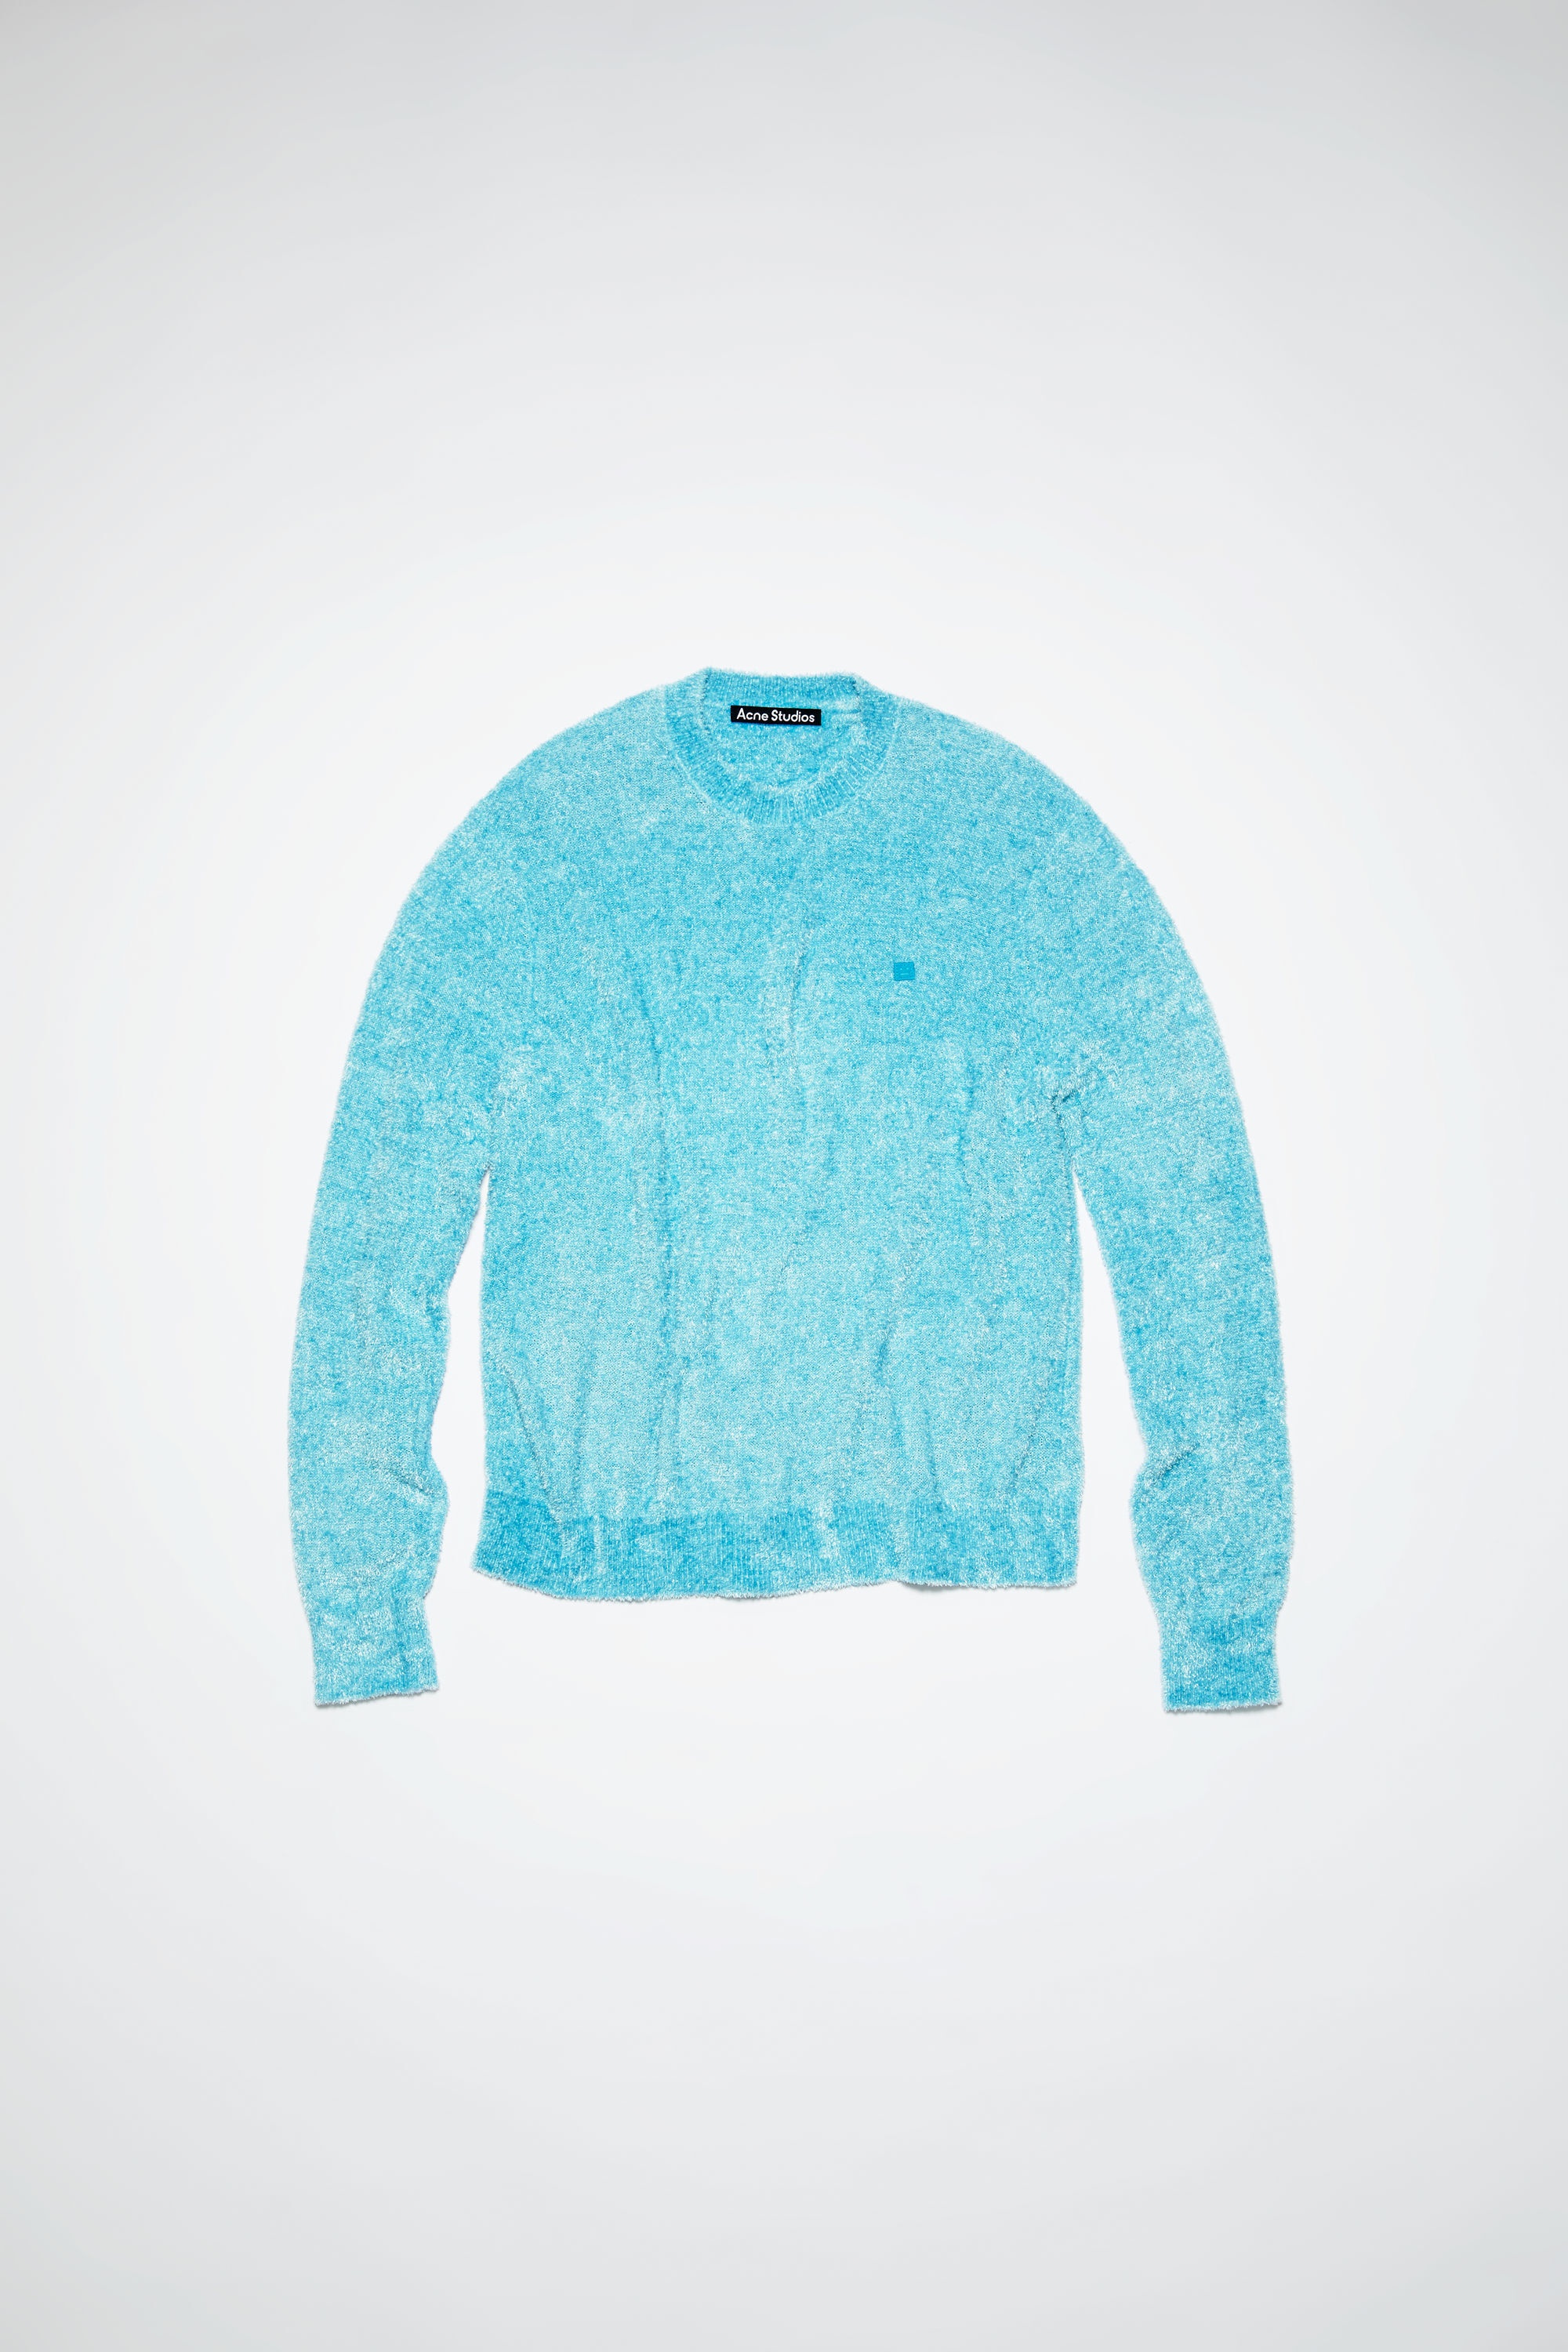 Textured sweater - Teal blue - 6